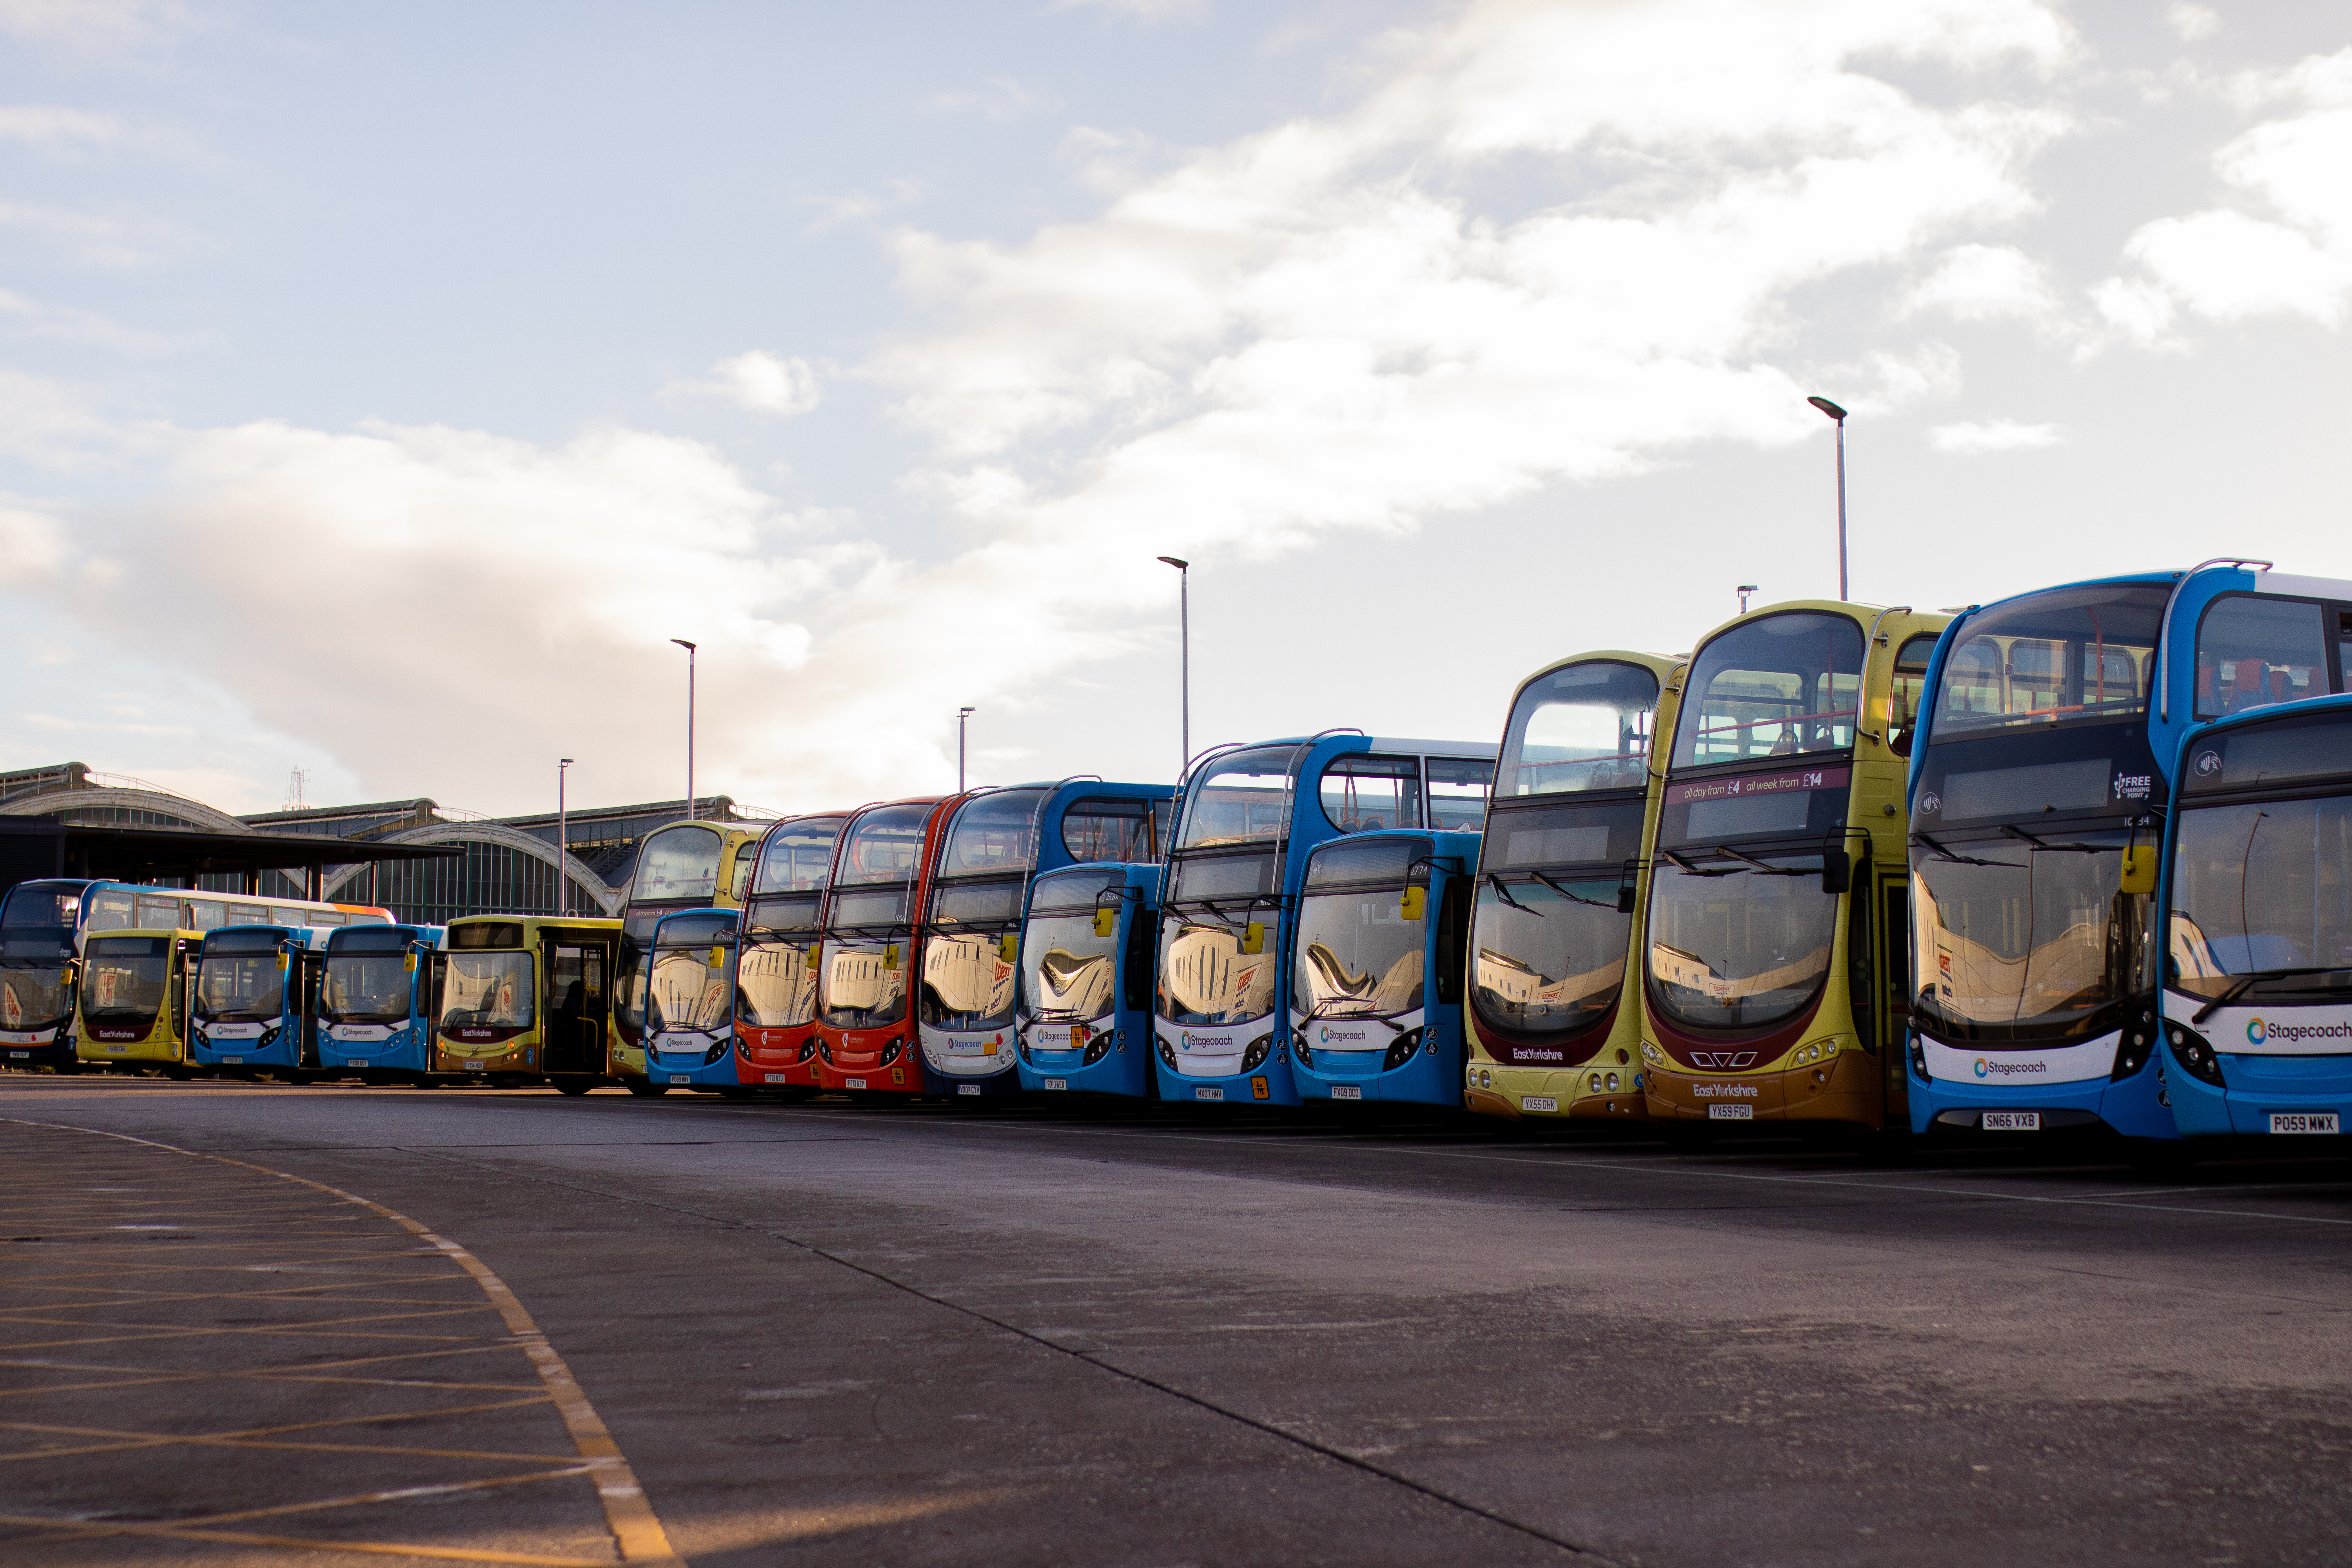 Photograph of buses